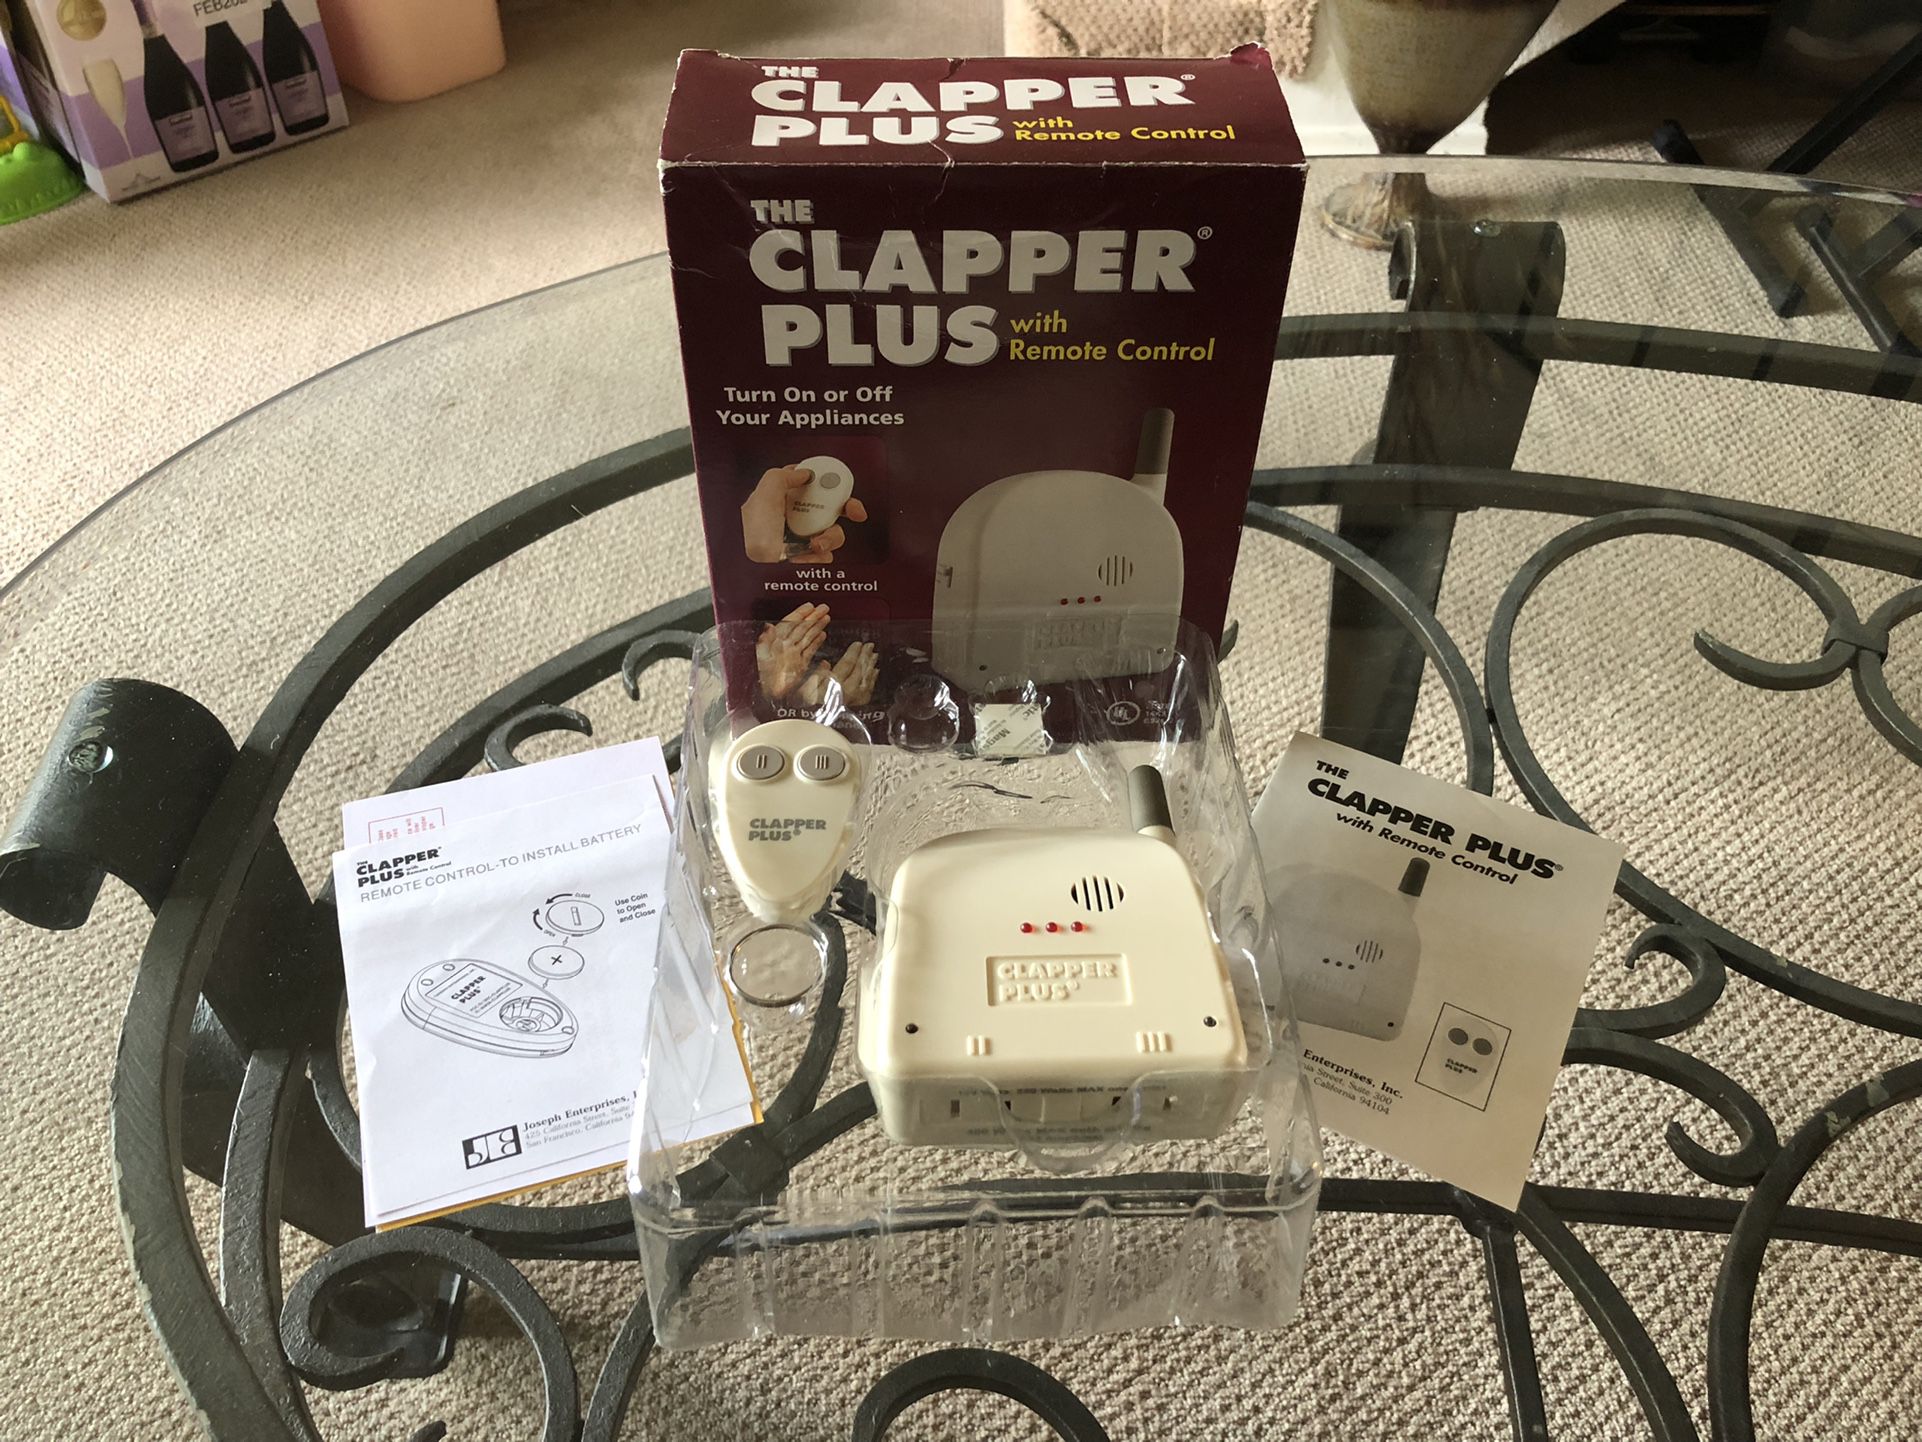 The Clapper (Clap on! Clap off!) for Sale in Windermere, FL - OfferUp